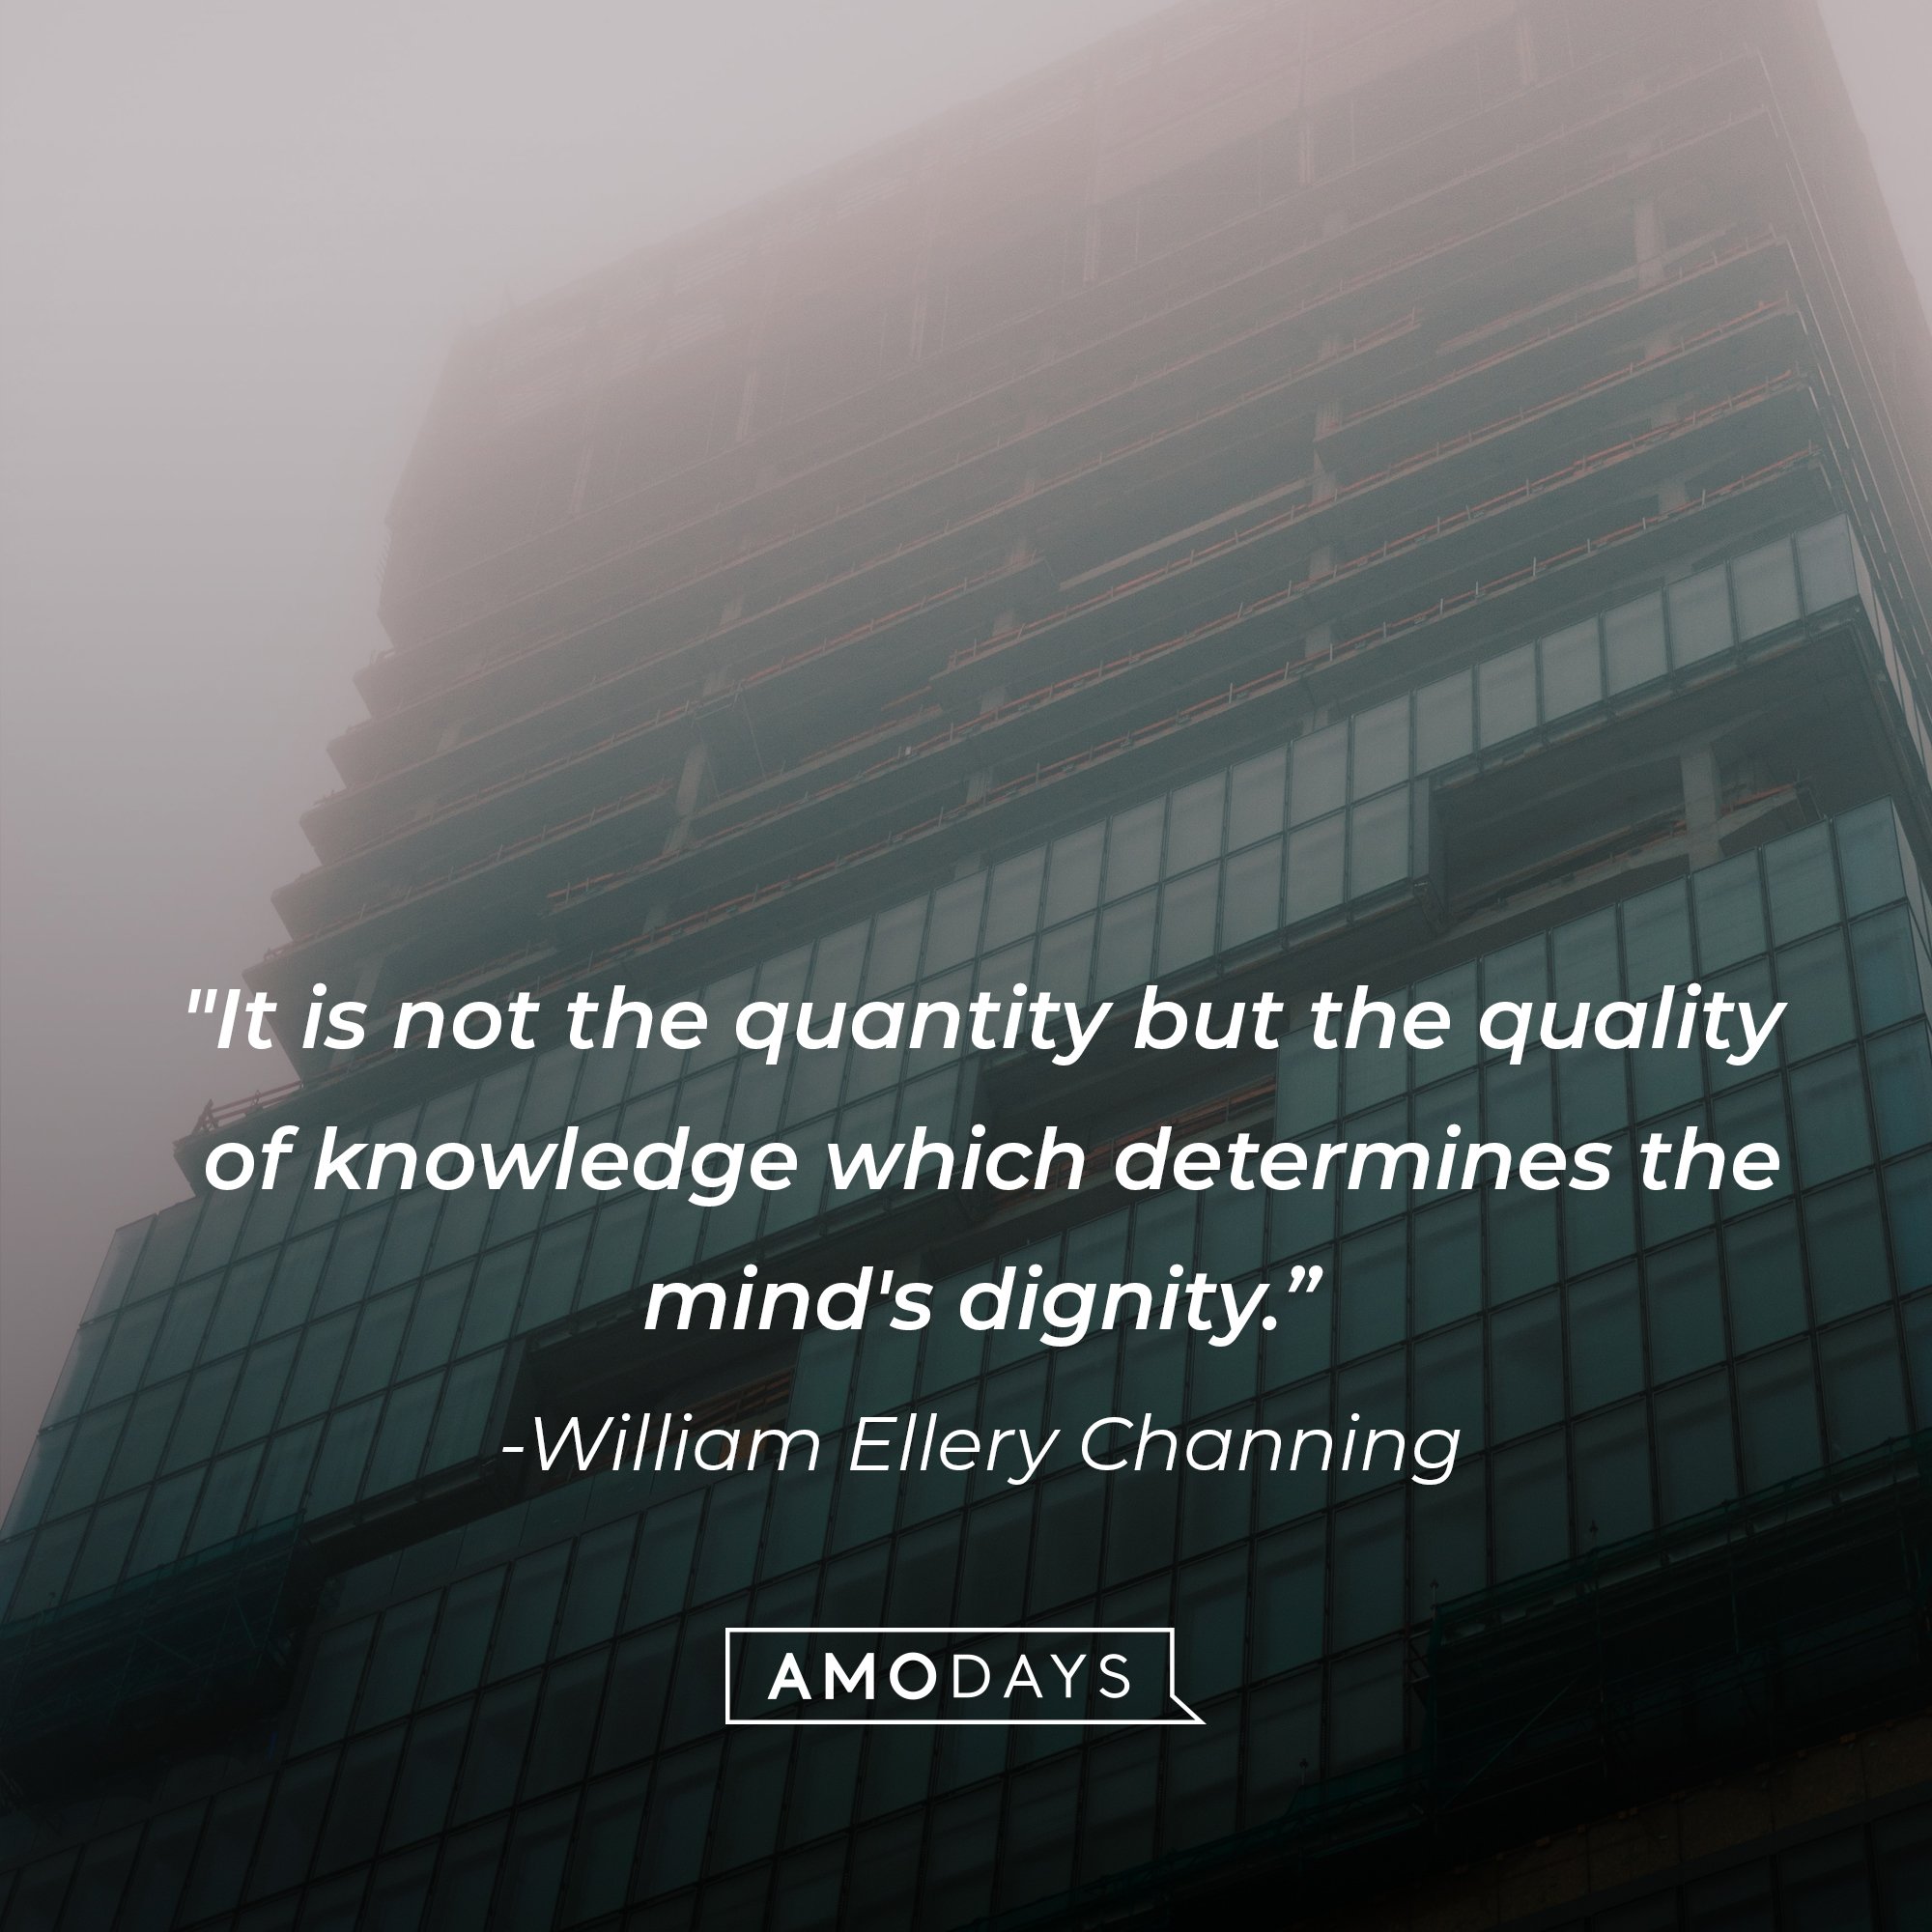 William Ellery Channing’s quote: "It is not the quantity but the quality of knowledge which determines the mind's dignity." | Image: AmoDays 